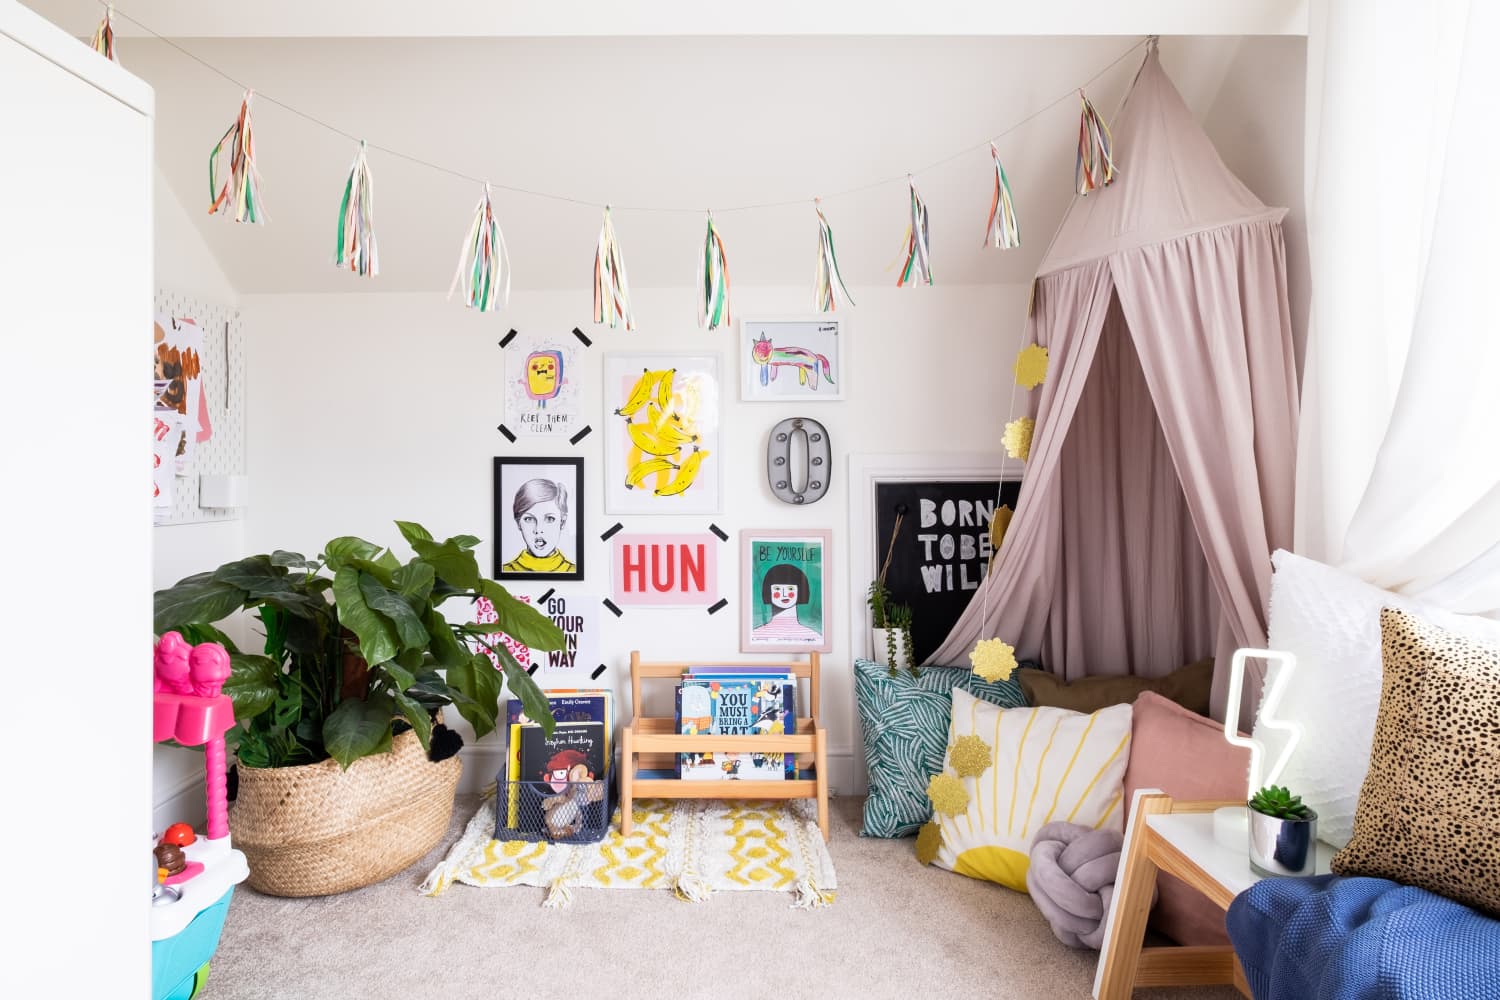 How Parents Organize and Store Their Kids’ Artwork